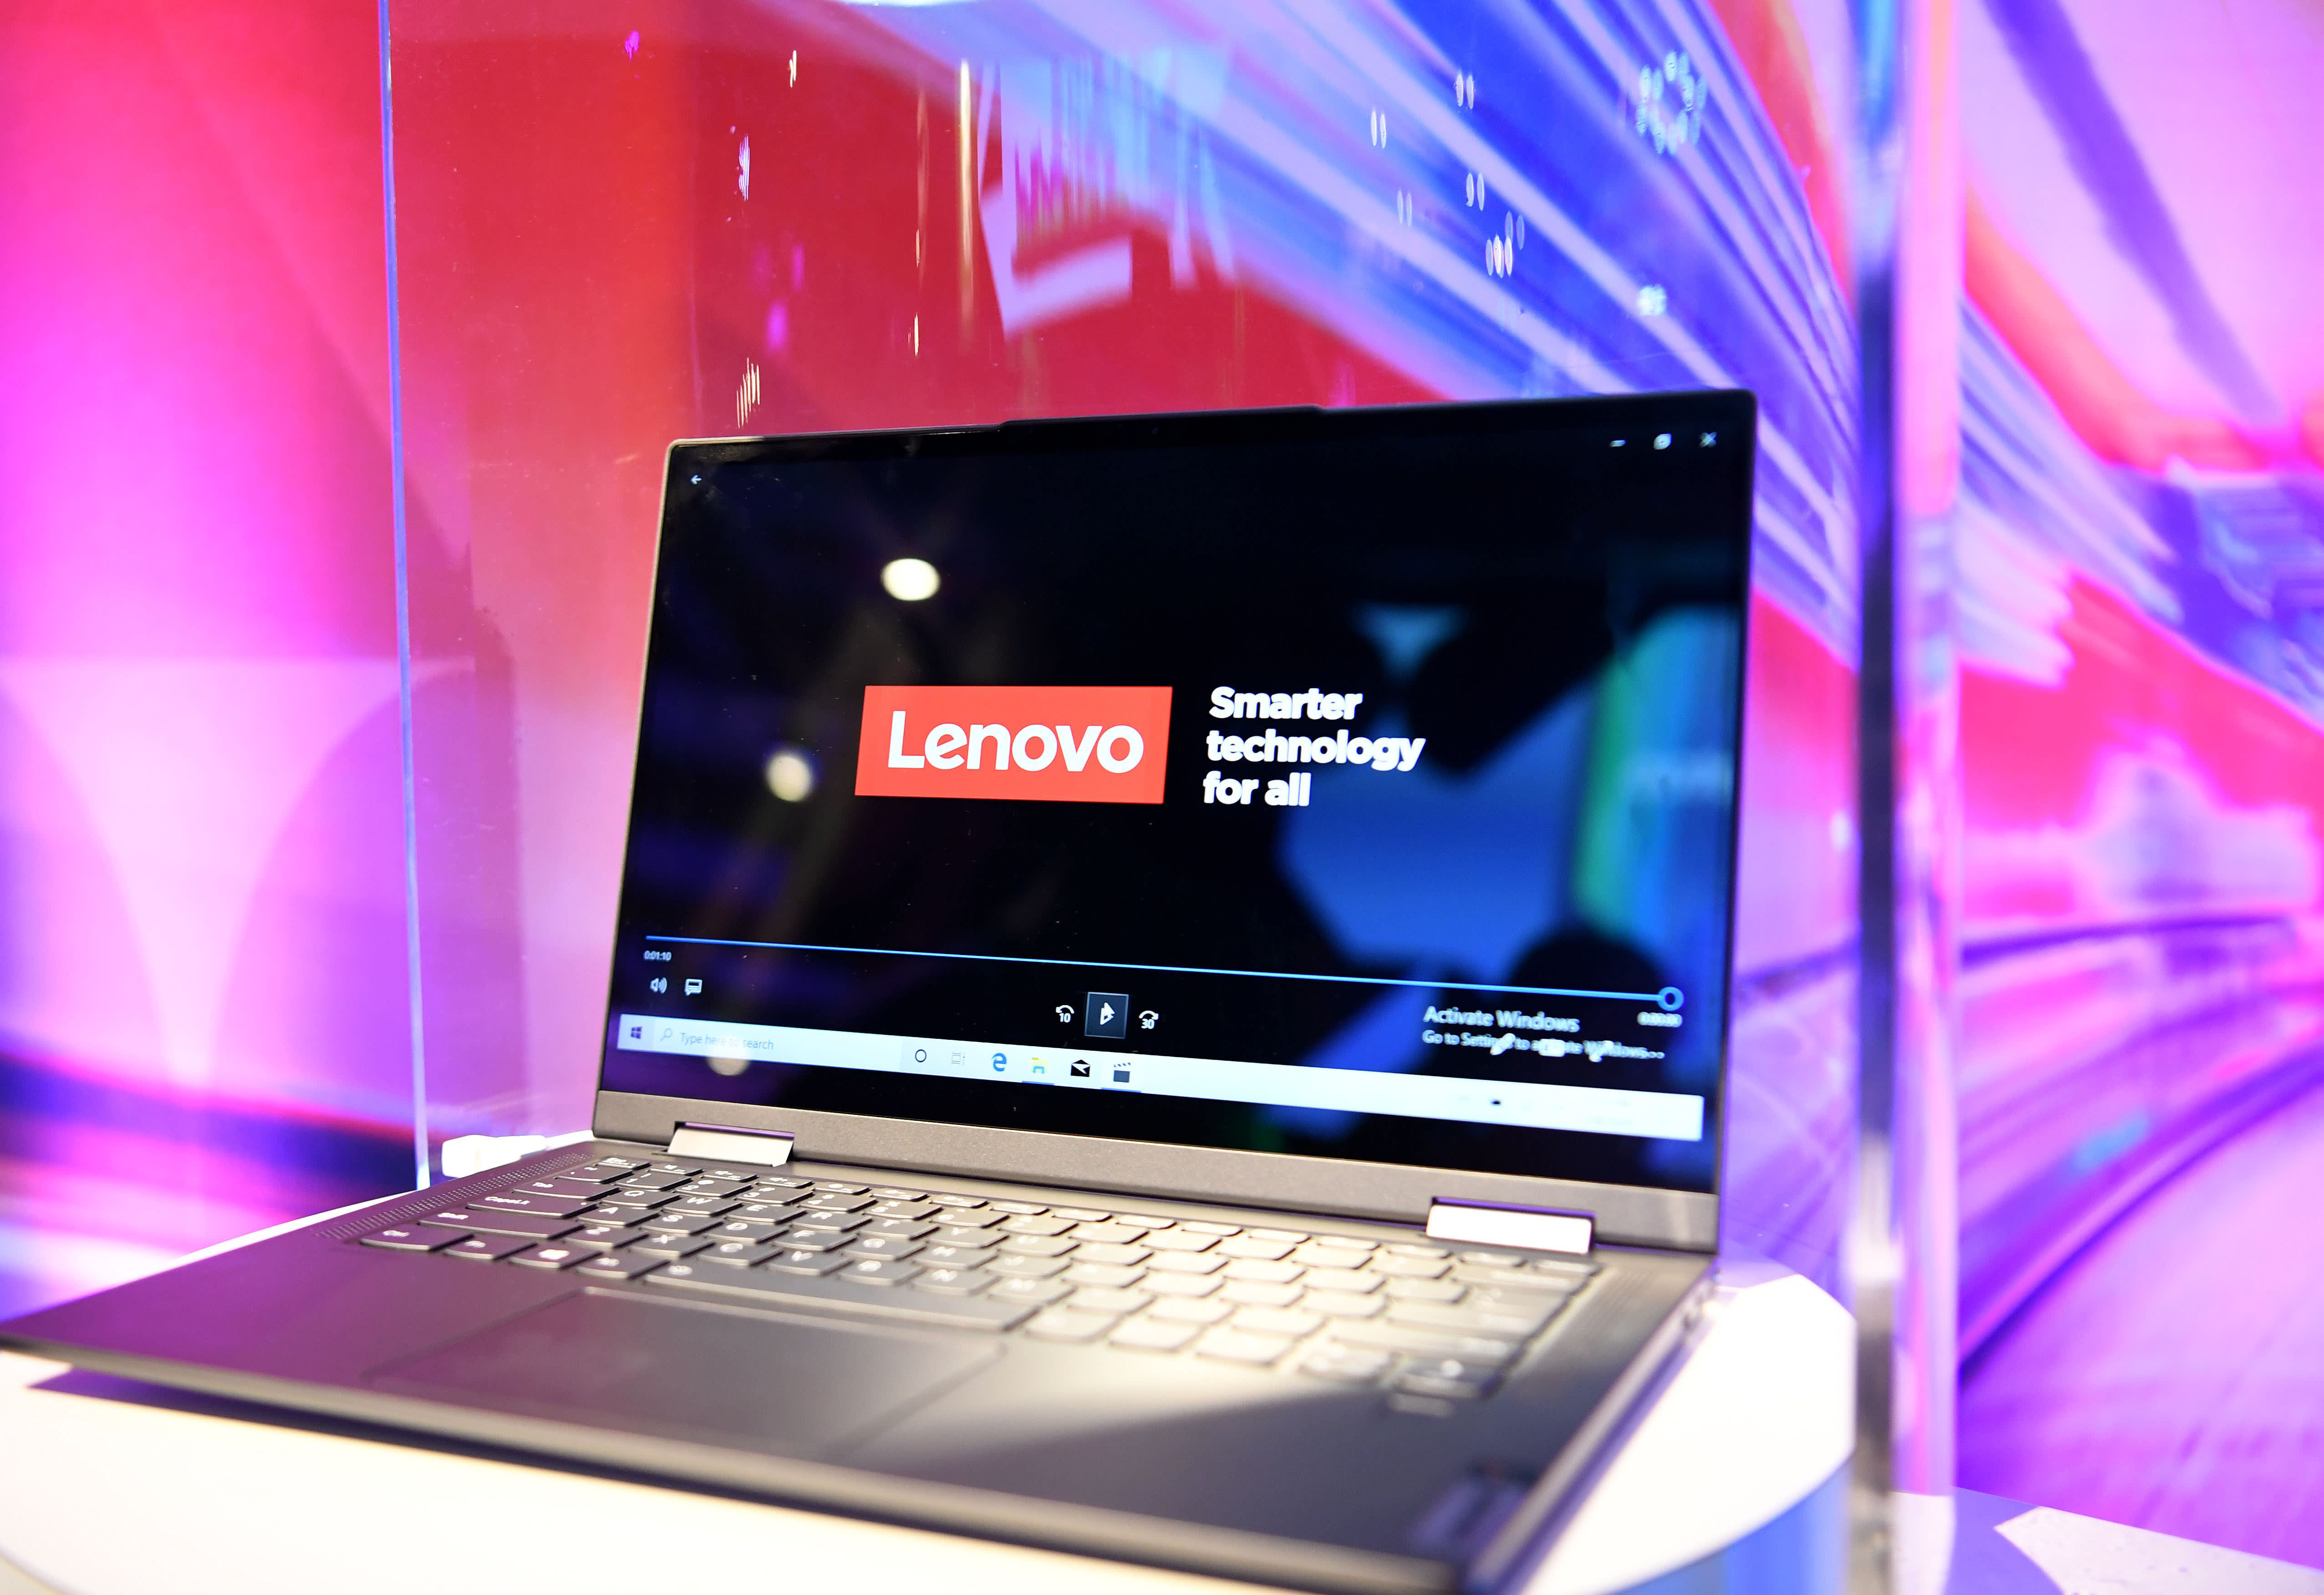 PC shipments fall for HP, Lenovo and Dell but Apple shipments rise in Q3